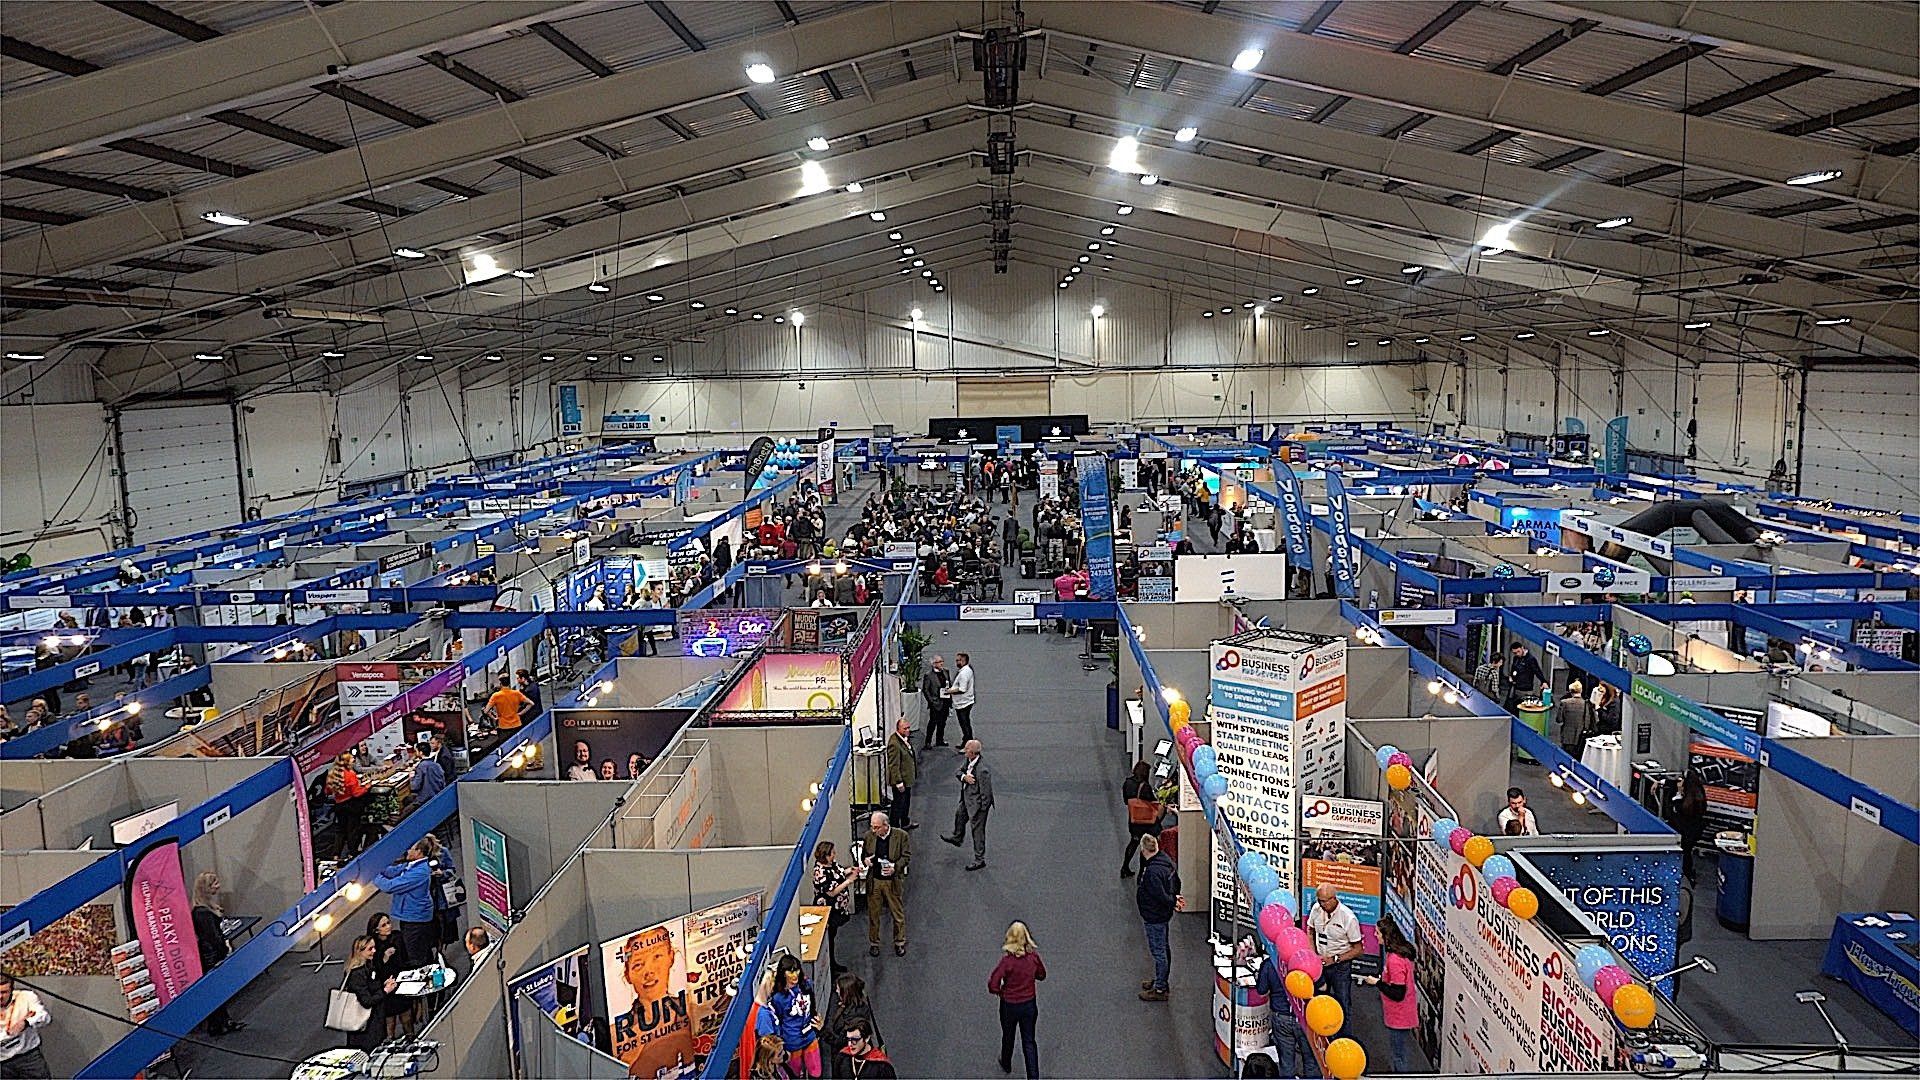 South West Business Expo 2019